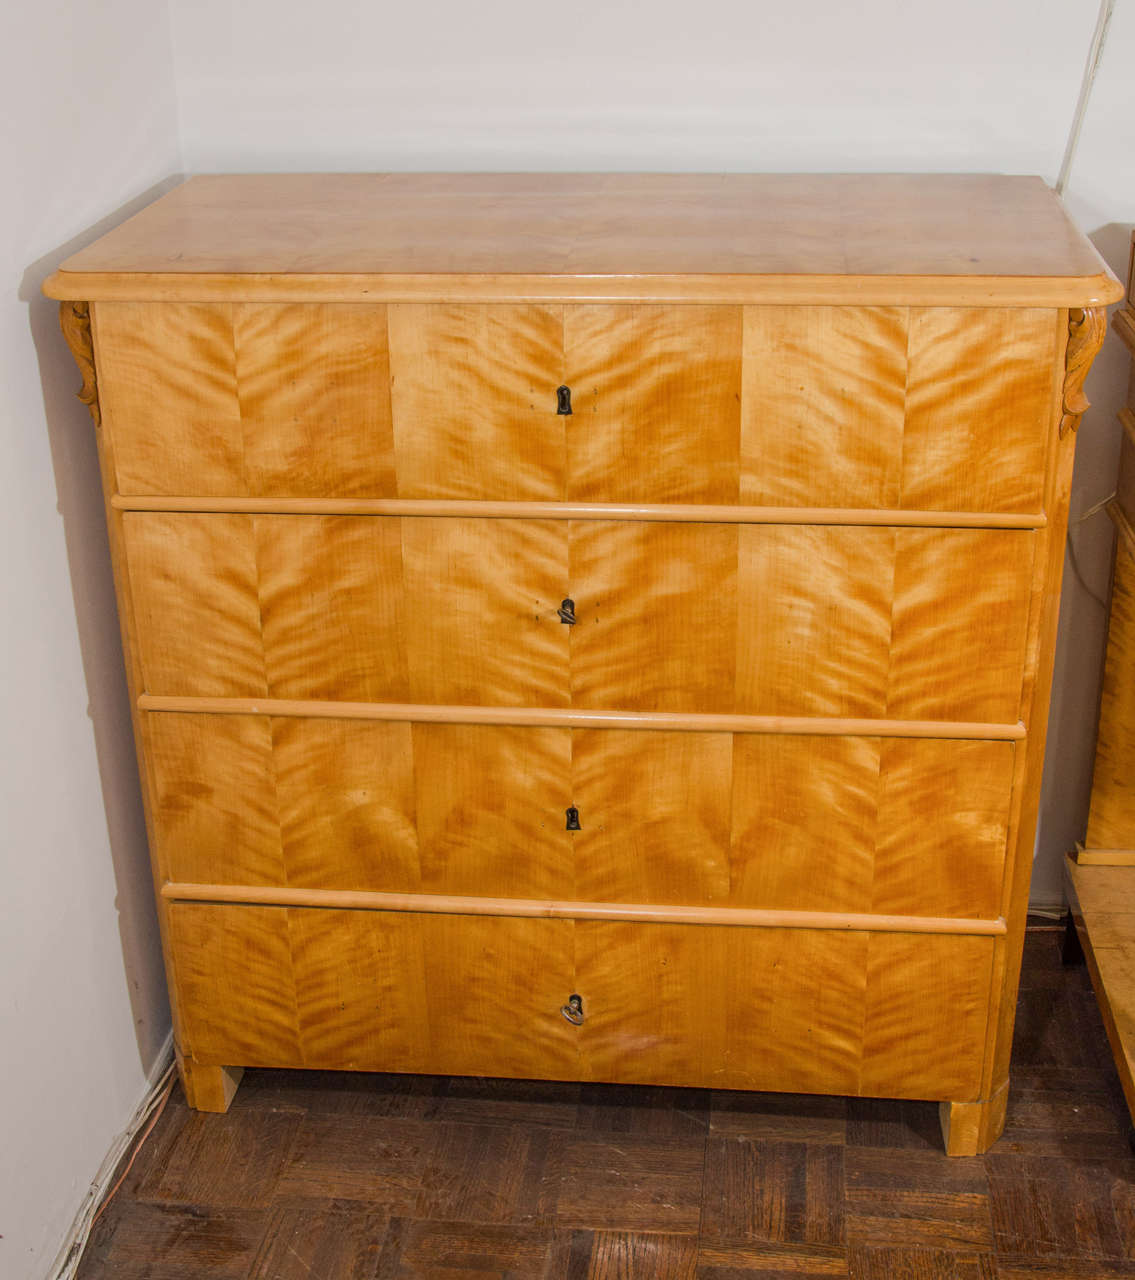 Crafted of birch and fir the four deep drawers are expertly veneered with hand-cut, book matched Nordic birch veneers and lock with original locks, keys and inset escutcheons. This masculine, minimally decorated chest rests on solid block feet.